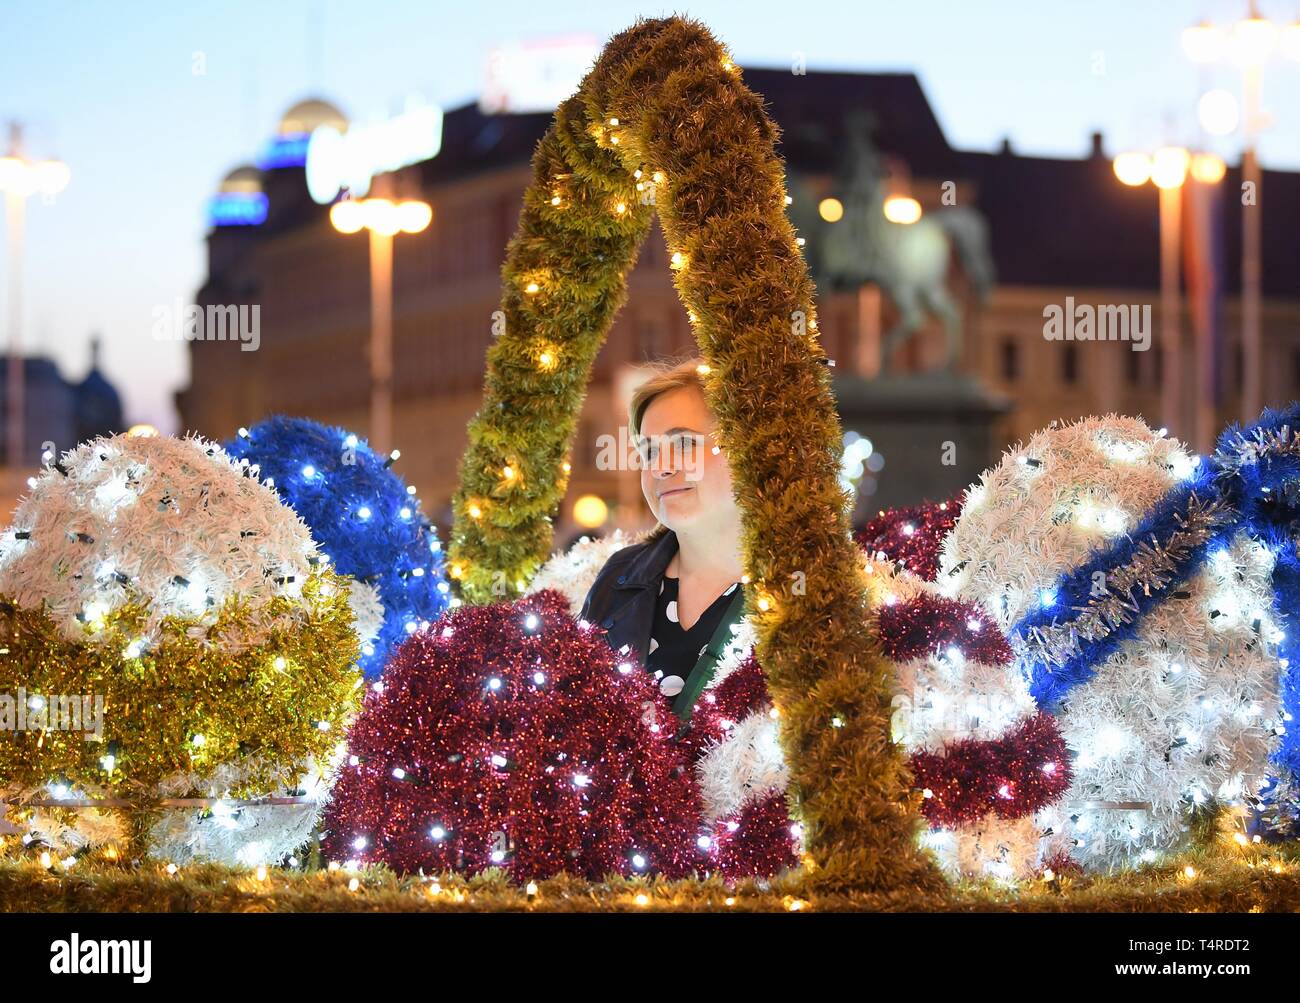 (190418) -- ZAGREB, April 18, 2019 (Xinhua) -- A visitor poses for photos with Easter decorations at the Ban Josip Jelacic square in Zagreb, Croatia, April 17, 2019. (Xinhua/Marko Lukunic) Stock Photo